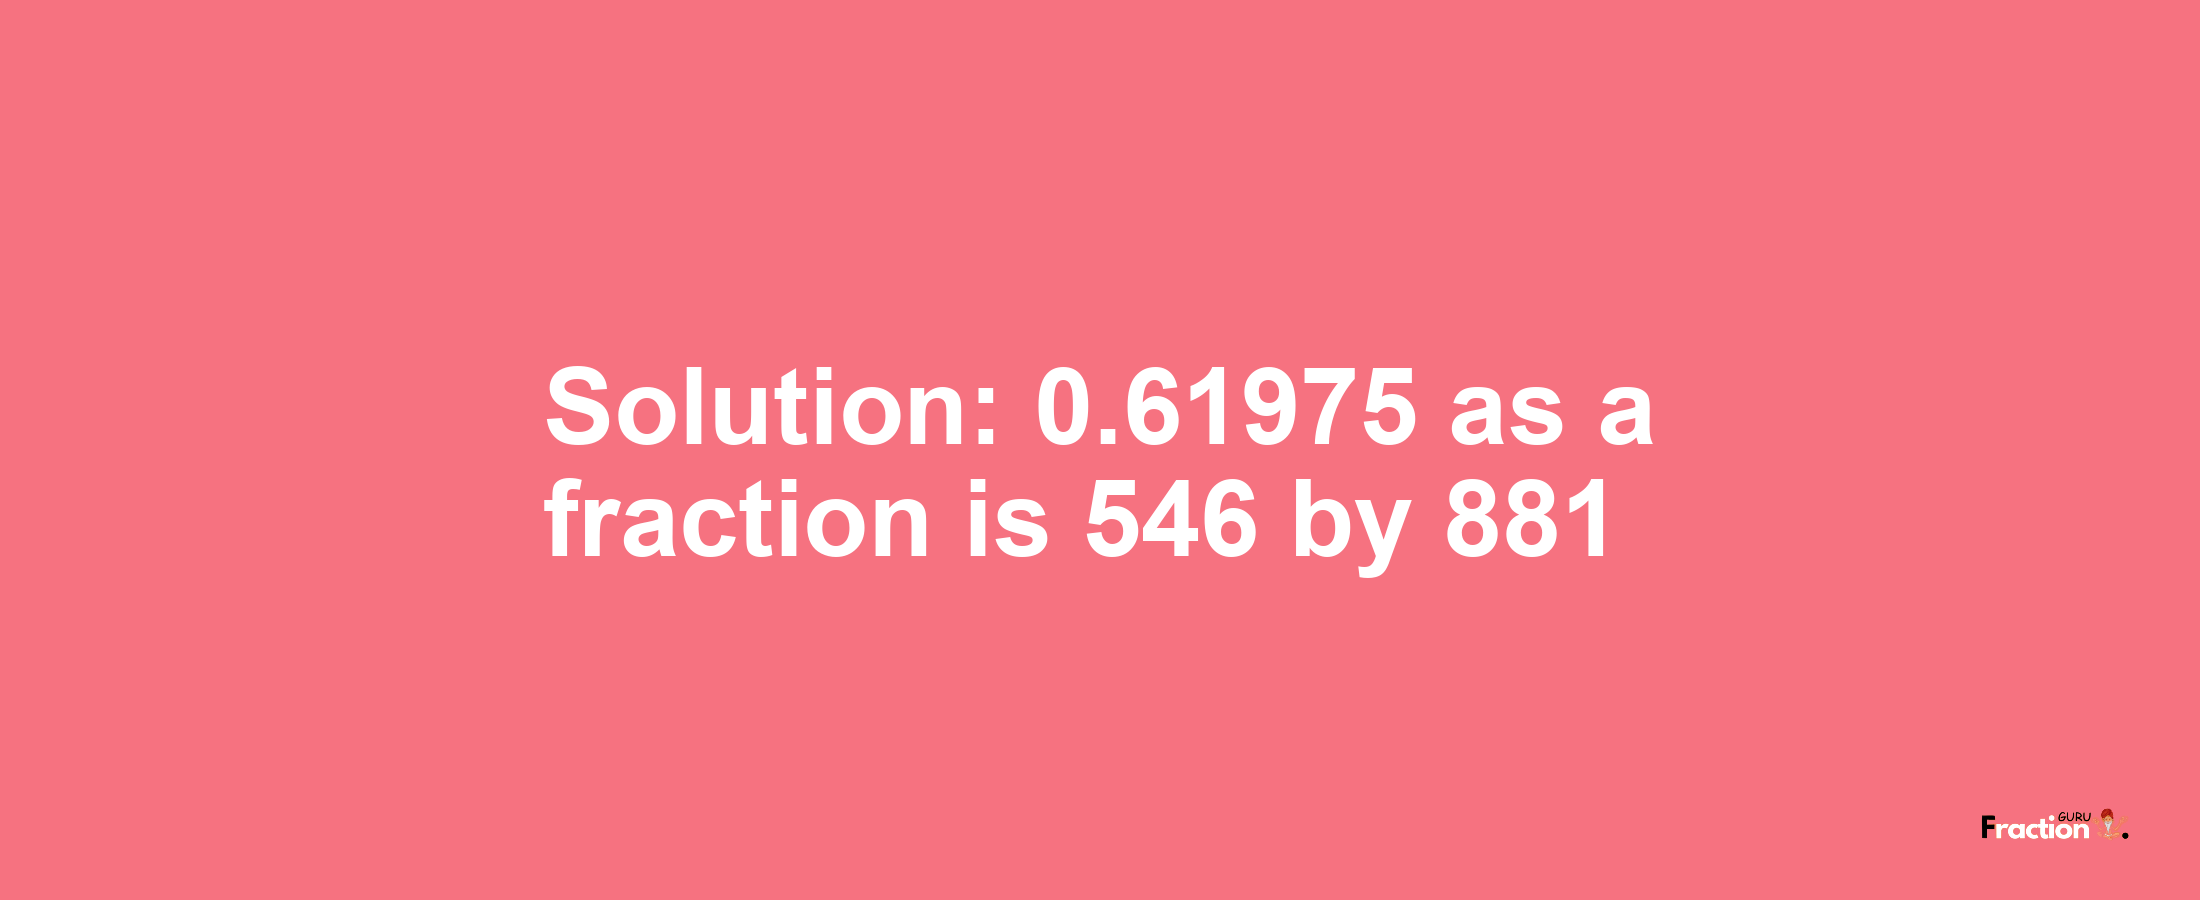 Solution:0.61975 as a fraction is 546/881